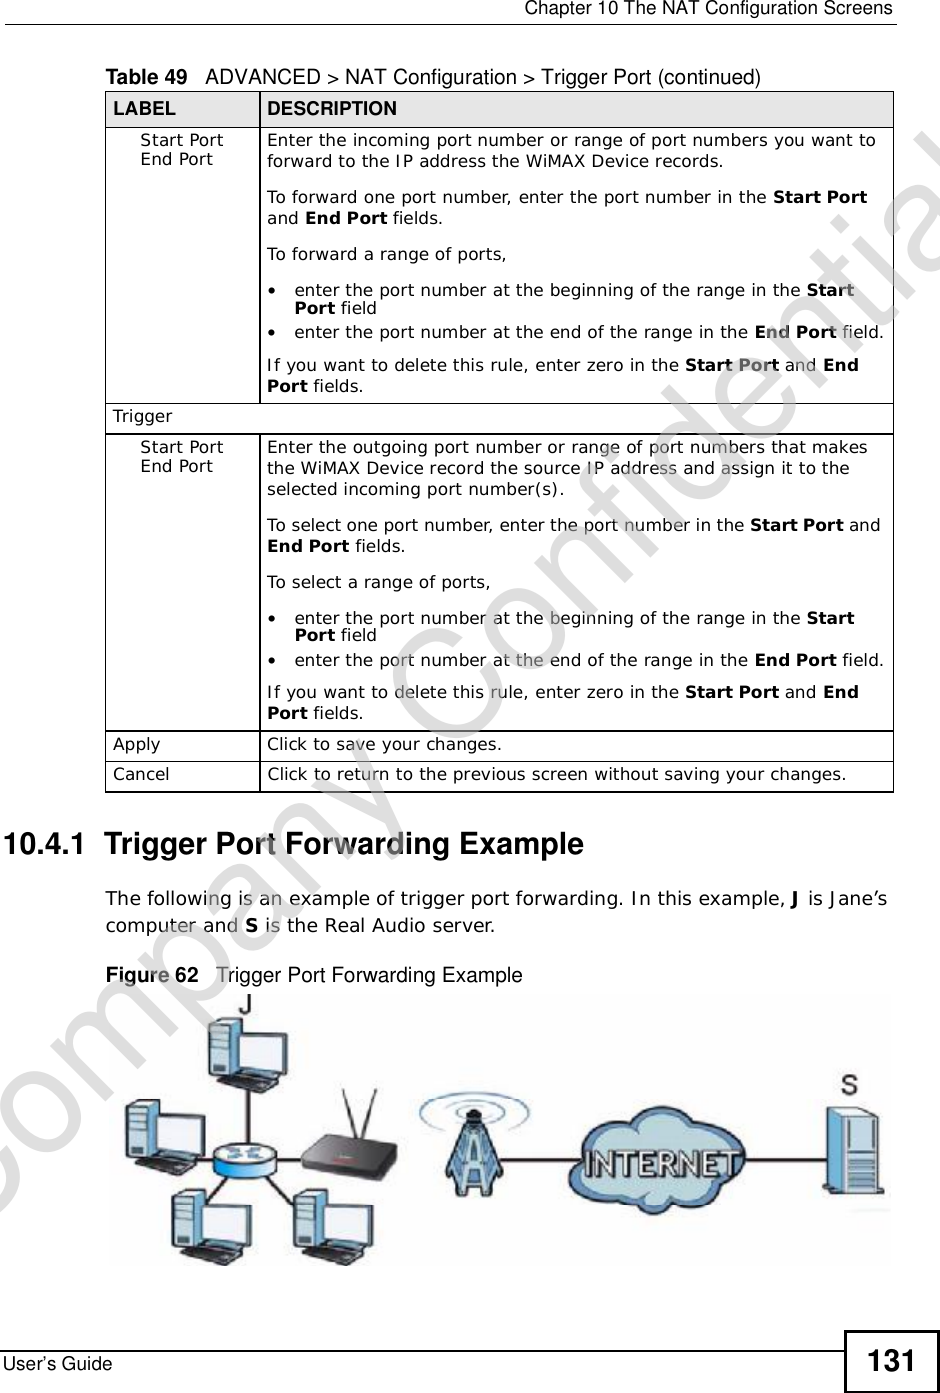  Chapter 10The NAT Configuration ScreensUser’s Guide 13110.4.1  Trigger Port Forwarding ExampleThe following is an example of trigger port forwarding. In this example, J is Jane’s computer and S is the Real Audio server.Figure 62   Trigger Port Forwarding ExampleStart PortEnd Port Enter the incoming port number or range of port numbers you want to forward to the IP address the WiMAX Device records.To forward one port number, enter the port number in the Start Portand End Port fields.To forward a range of ports,•enter the port number at the beginning of the range in the Start Port field•enter the port number at the end of the range in the End Port field.If you want to delete this rule, enter zero in the Start Port and EndPort fields.TriggerStart PortEnd Port Enter the outgoing port number or range of port numbers that makes the WiMAX Device record the source IP address and assign it to the selected incoming port number(s).To select one port number, enter the port number in the Start Port and End Port fields.To select a range of ports,•enter the port number at the beginning of the range in the Start Port field•enter the port number at the end of the range in the End Port field.If you want to delete this rule, enter zero in the Start Port and EndPort fields.Apply Click to save your changes.CancelClick to return to the previous screen without saving your changes.Table 49   ADVANCED &gt; NAT Configuration &gt; Trigger Port (continued)LABEL DESCRIPTIONCompany Confidential